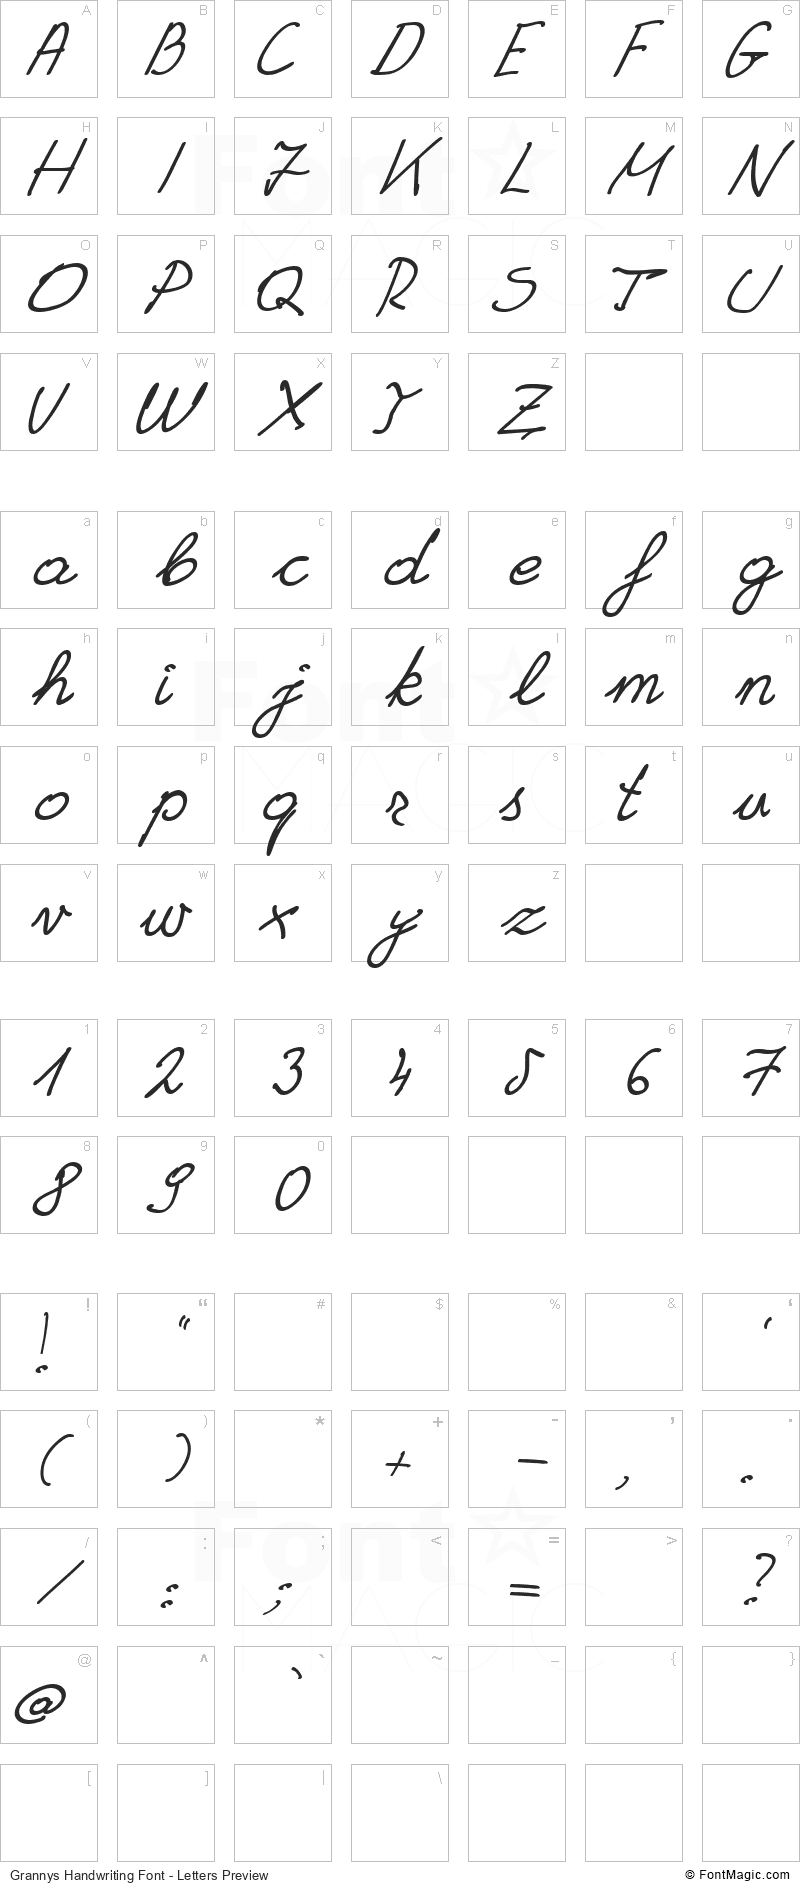 Grannys Handwriting Font - All Latters Preview Chart